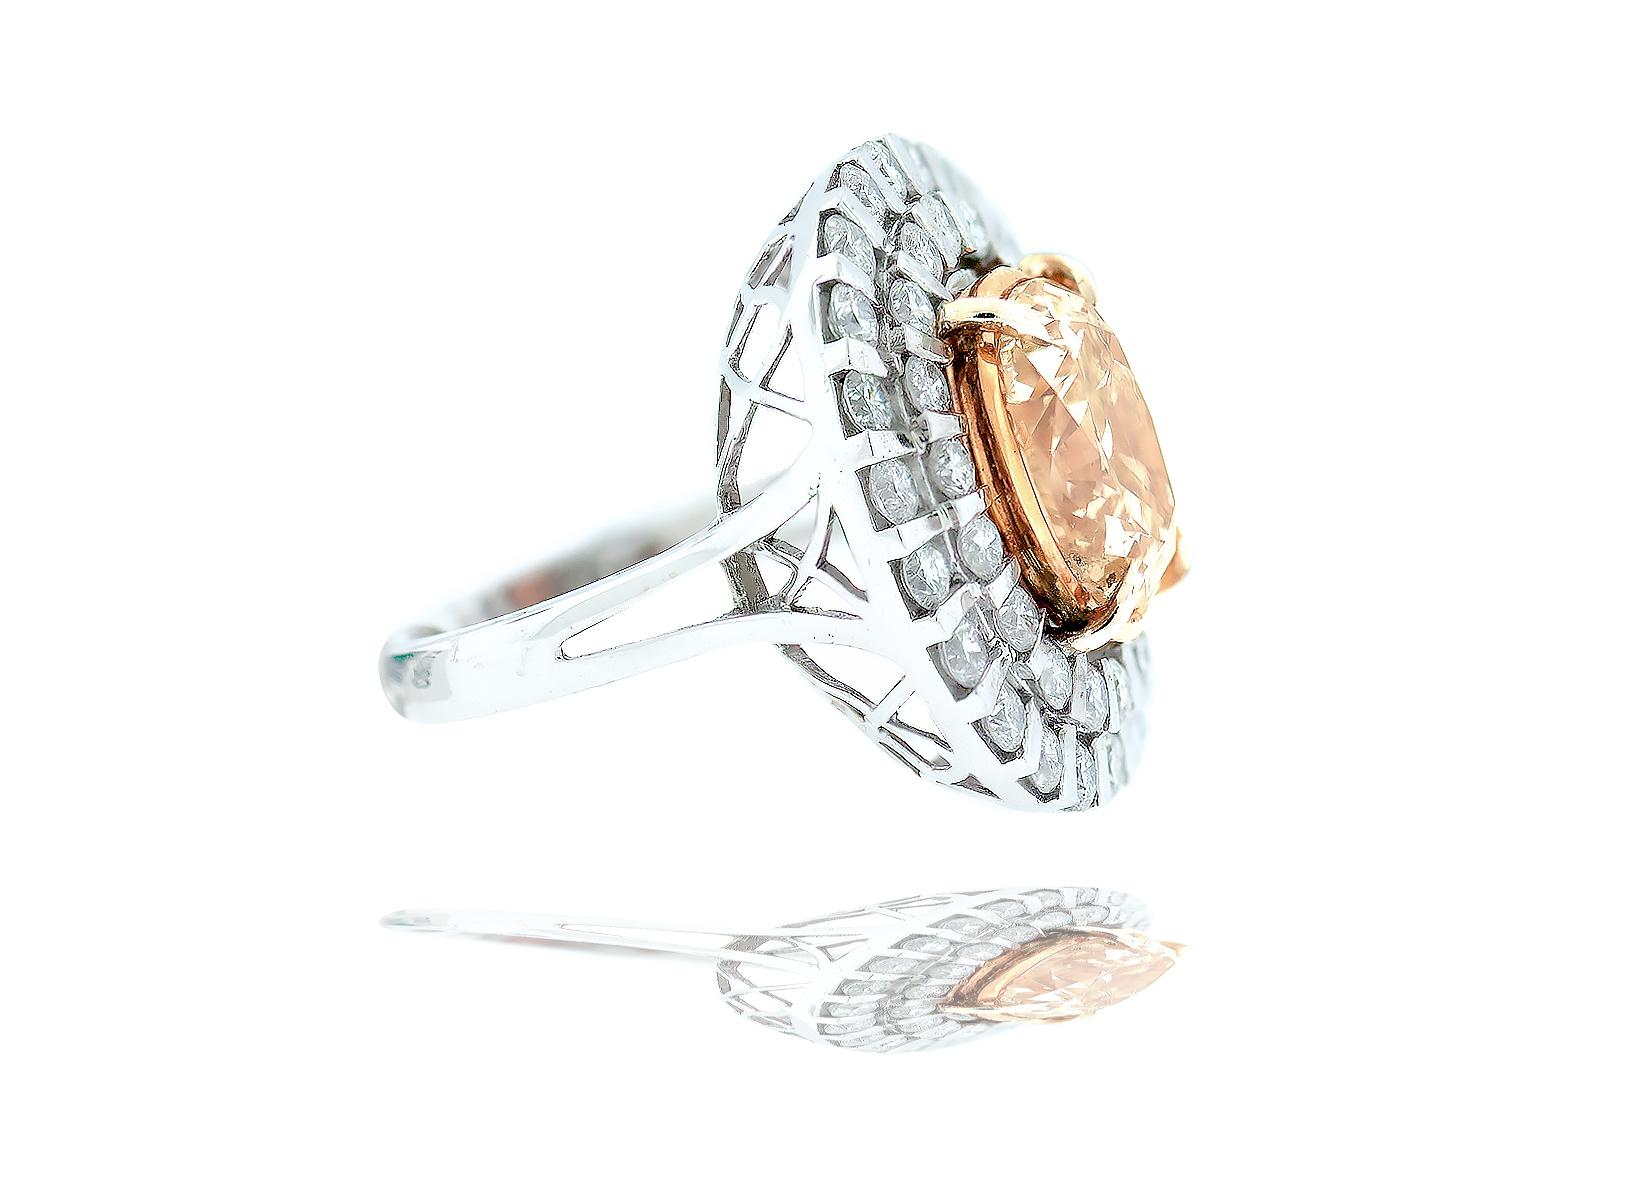 Champagne, 8.25 CTW Cocktail Diamond Ring
Amazing ring consists of a center 6.77 carat oval shaped center diamond which is champagne colored. The setting consists of a double row of diamonds surrounding and measuring  1-1/8 